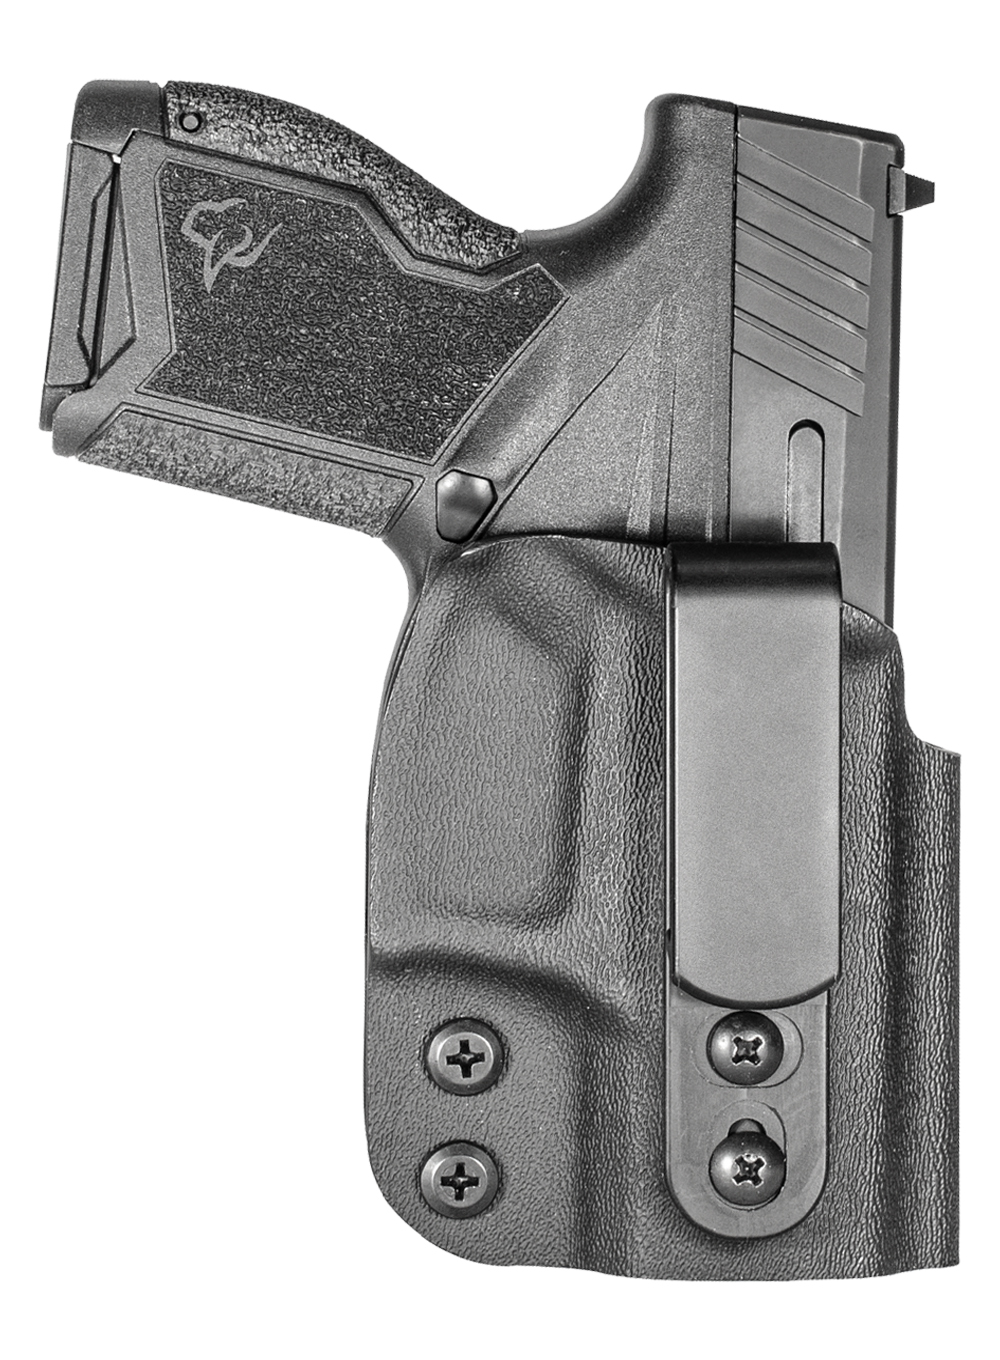 Tuckable IWB and OWB Optics Ready Fobus TGX4 Concealed Carry Holster for Taurus GX4 Pistol 